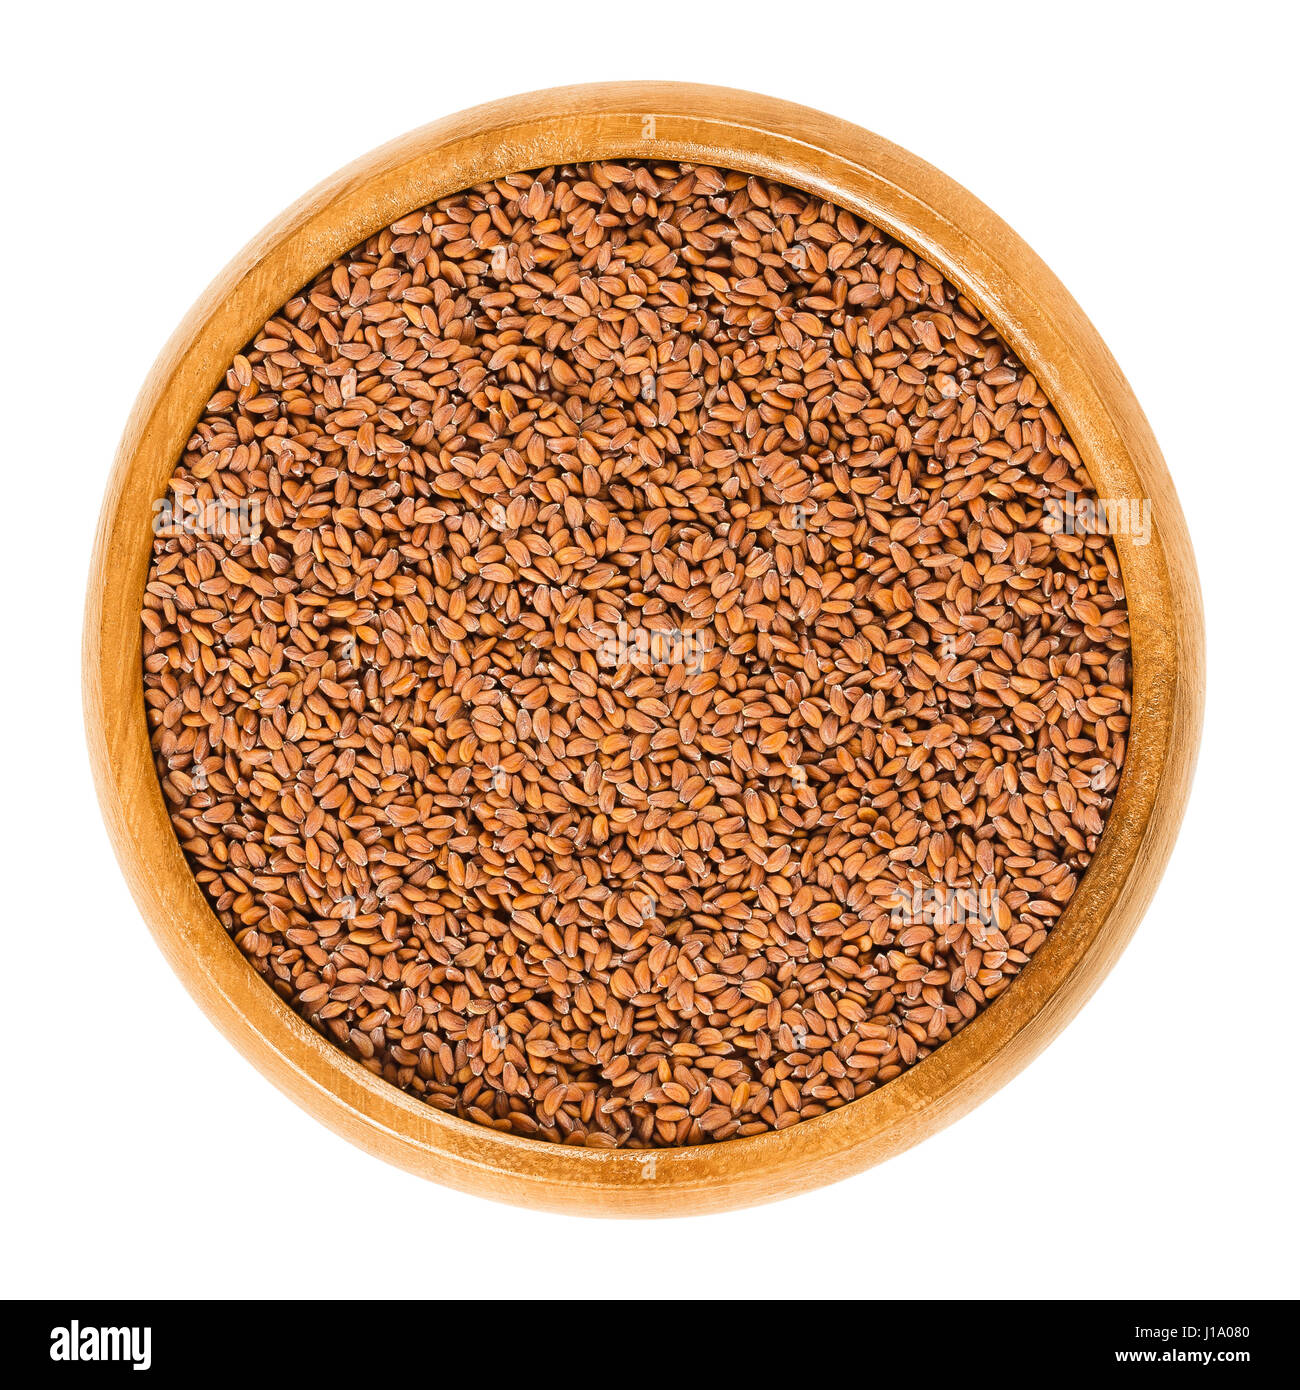 Garden cress seeds in wooden bowl. Lepidium sativum. Used for sprouting and germinating with water in a jar for consumption and as a herb. Stock Photo